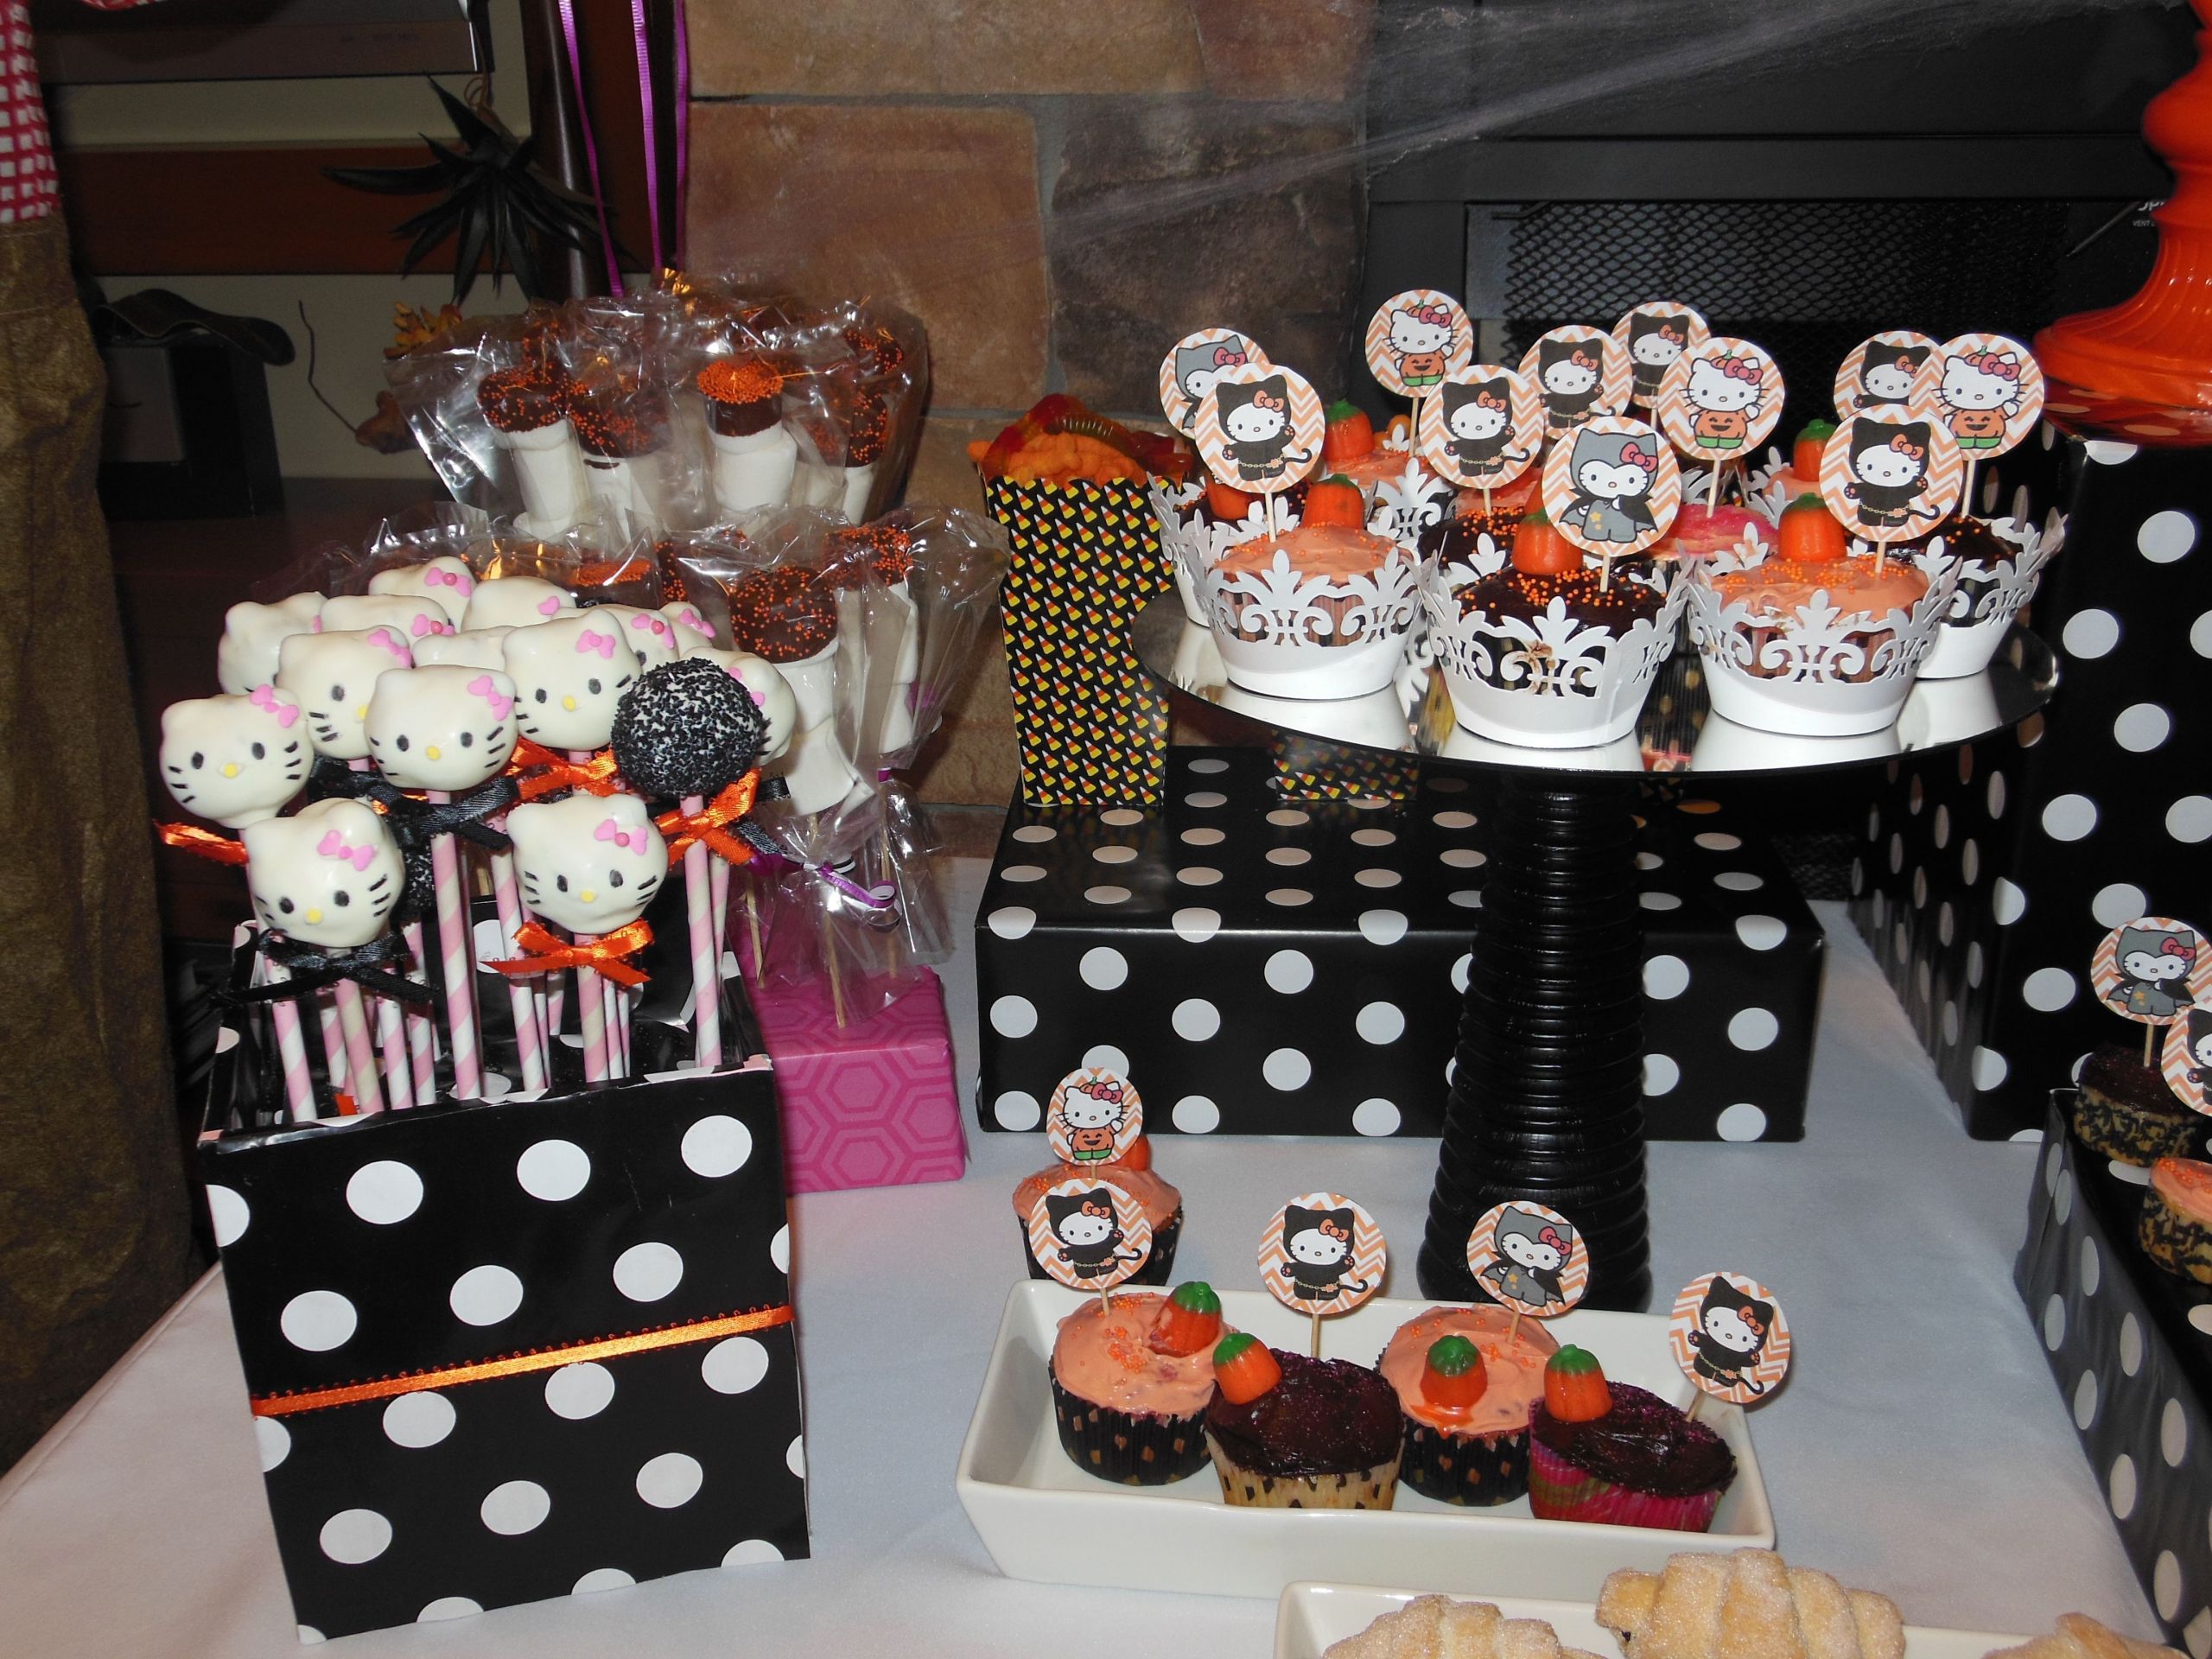 Hello Kitty Halloween Party Ideas
 Wrap boxes in Halloween paper for setting food & decor on